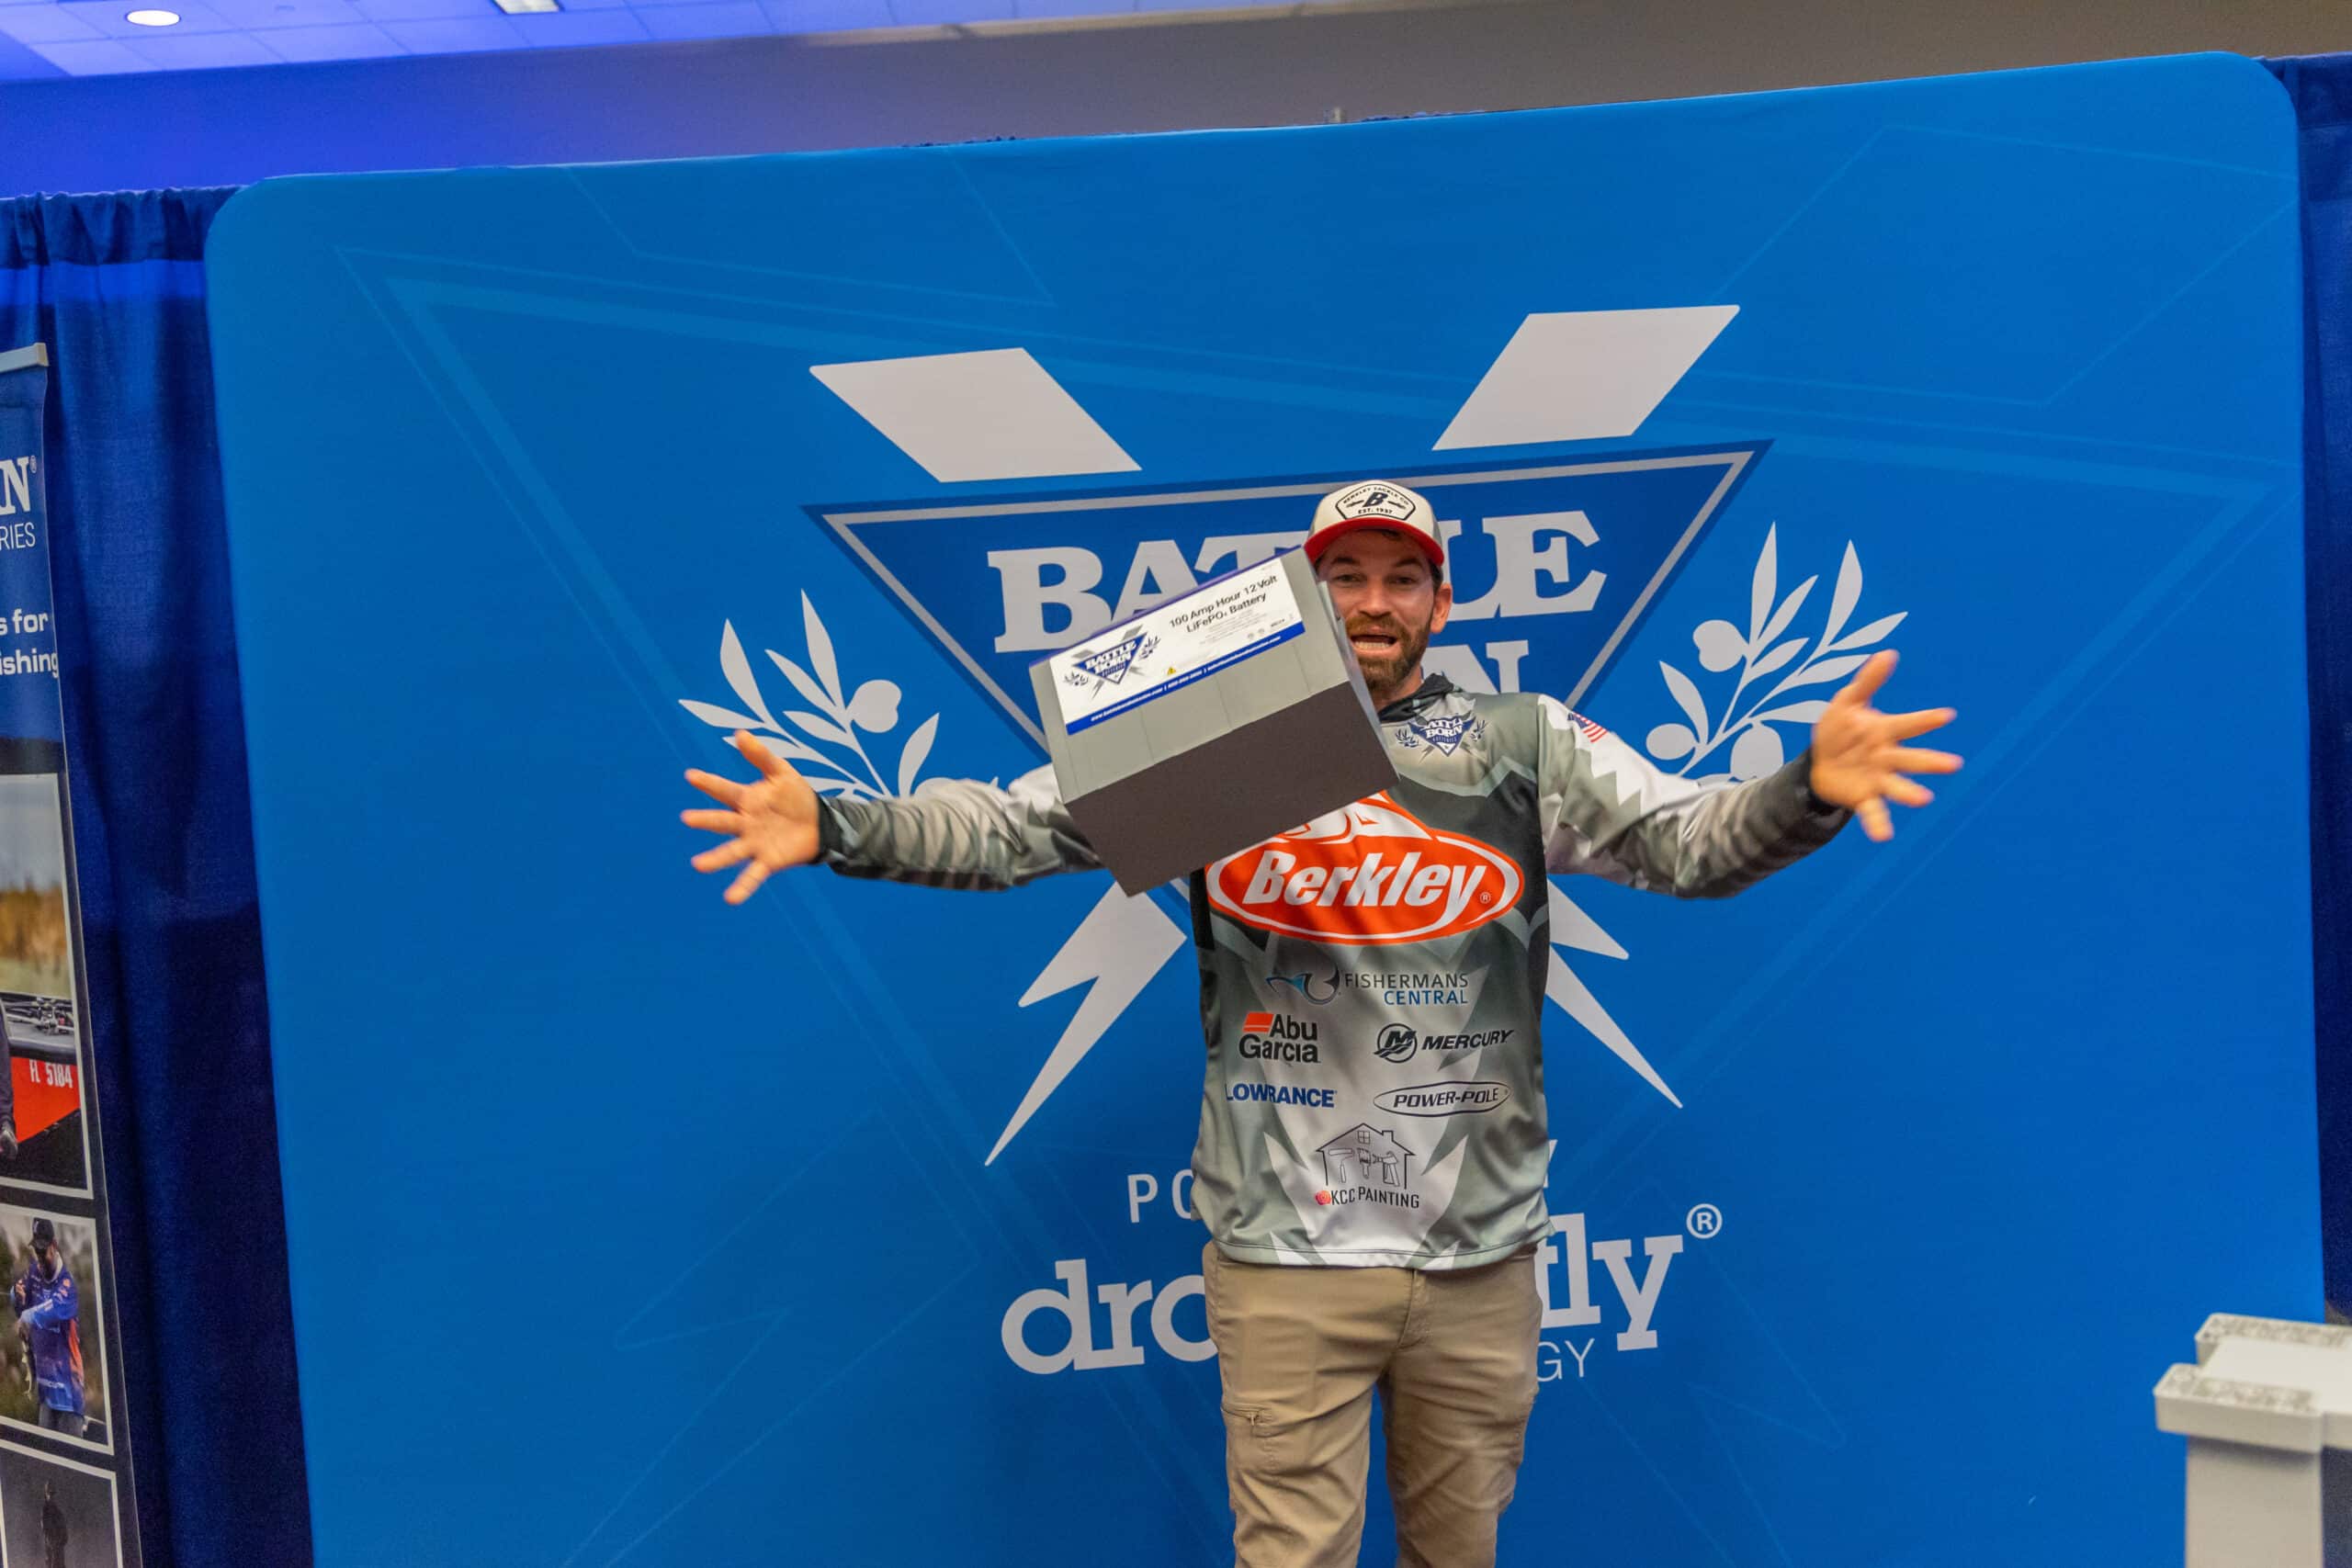 Professional Angler Keith Carson at the Bassmaster Classic